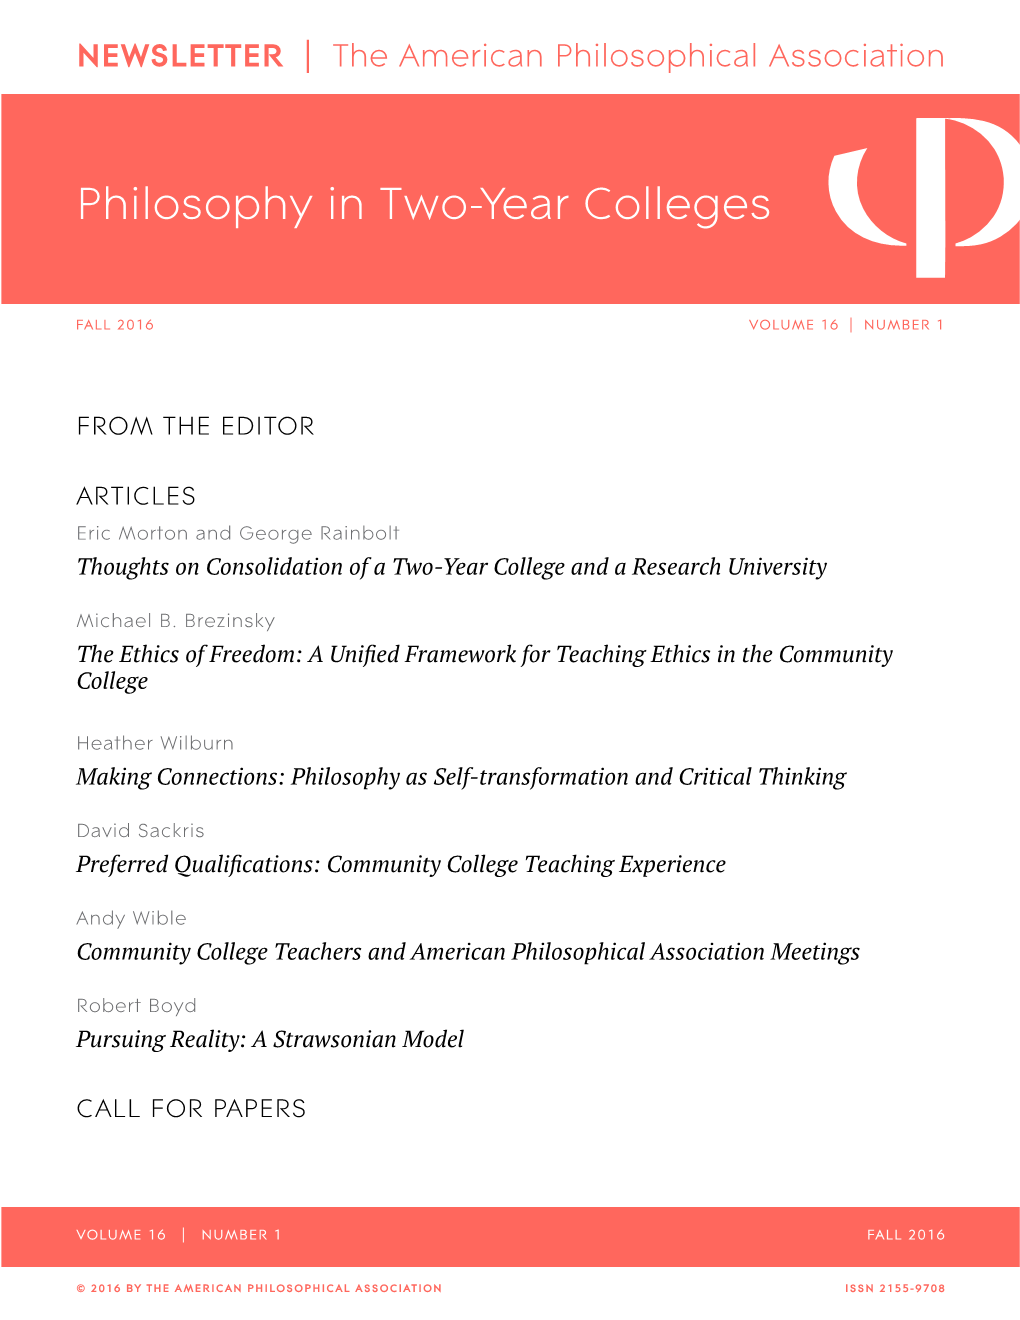 APA Newsletter on Philosophy in Two-Year Colleges, Vol. 16, No. 1